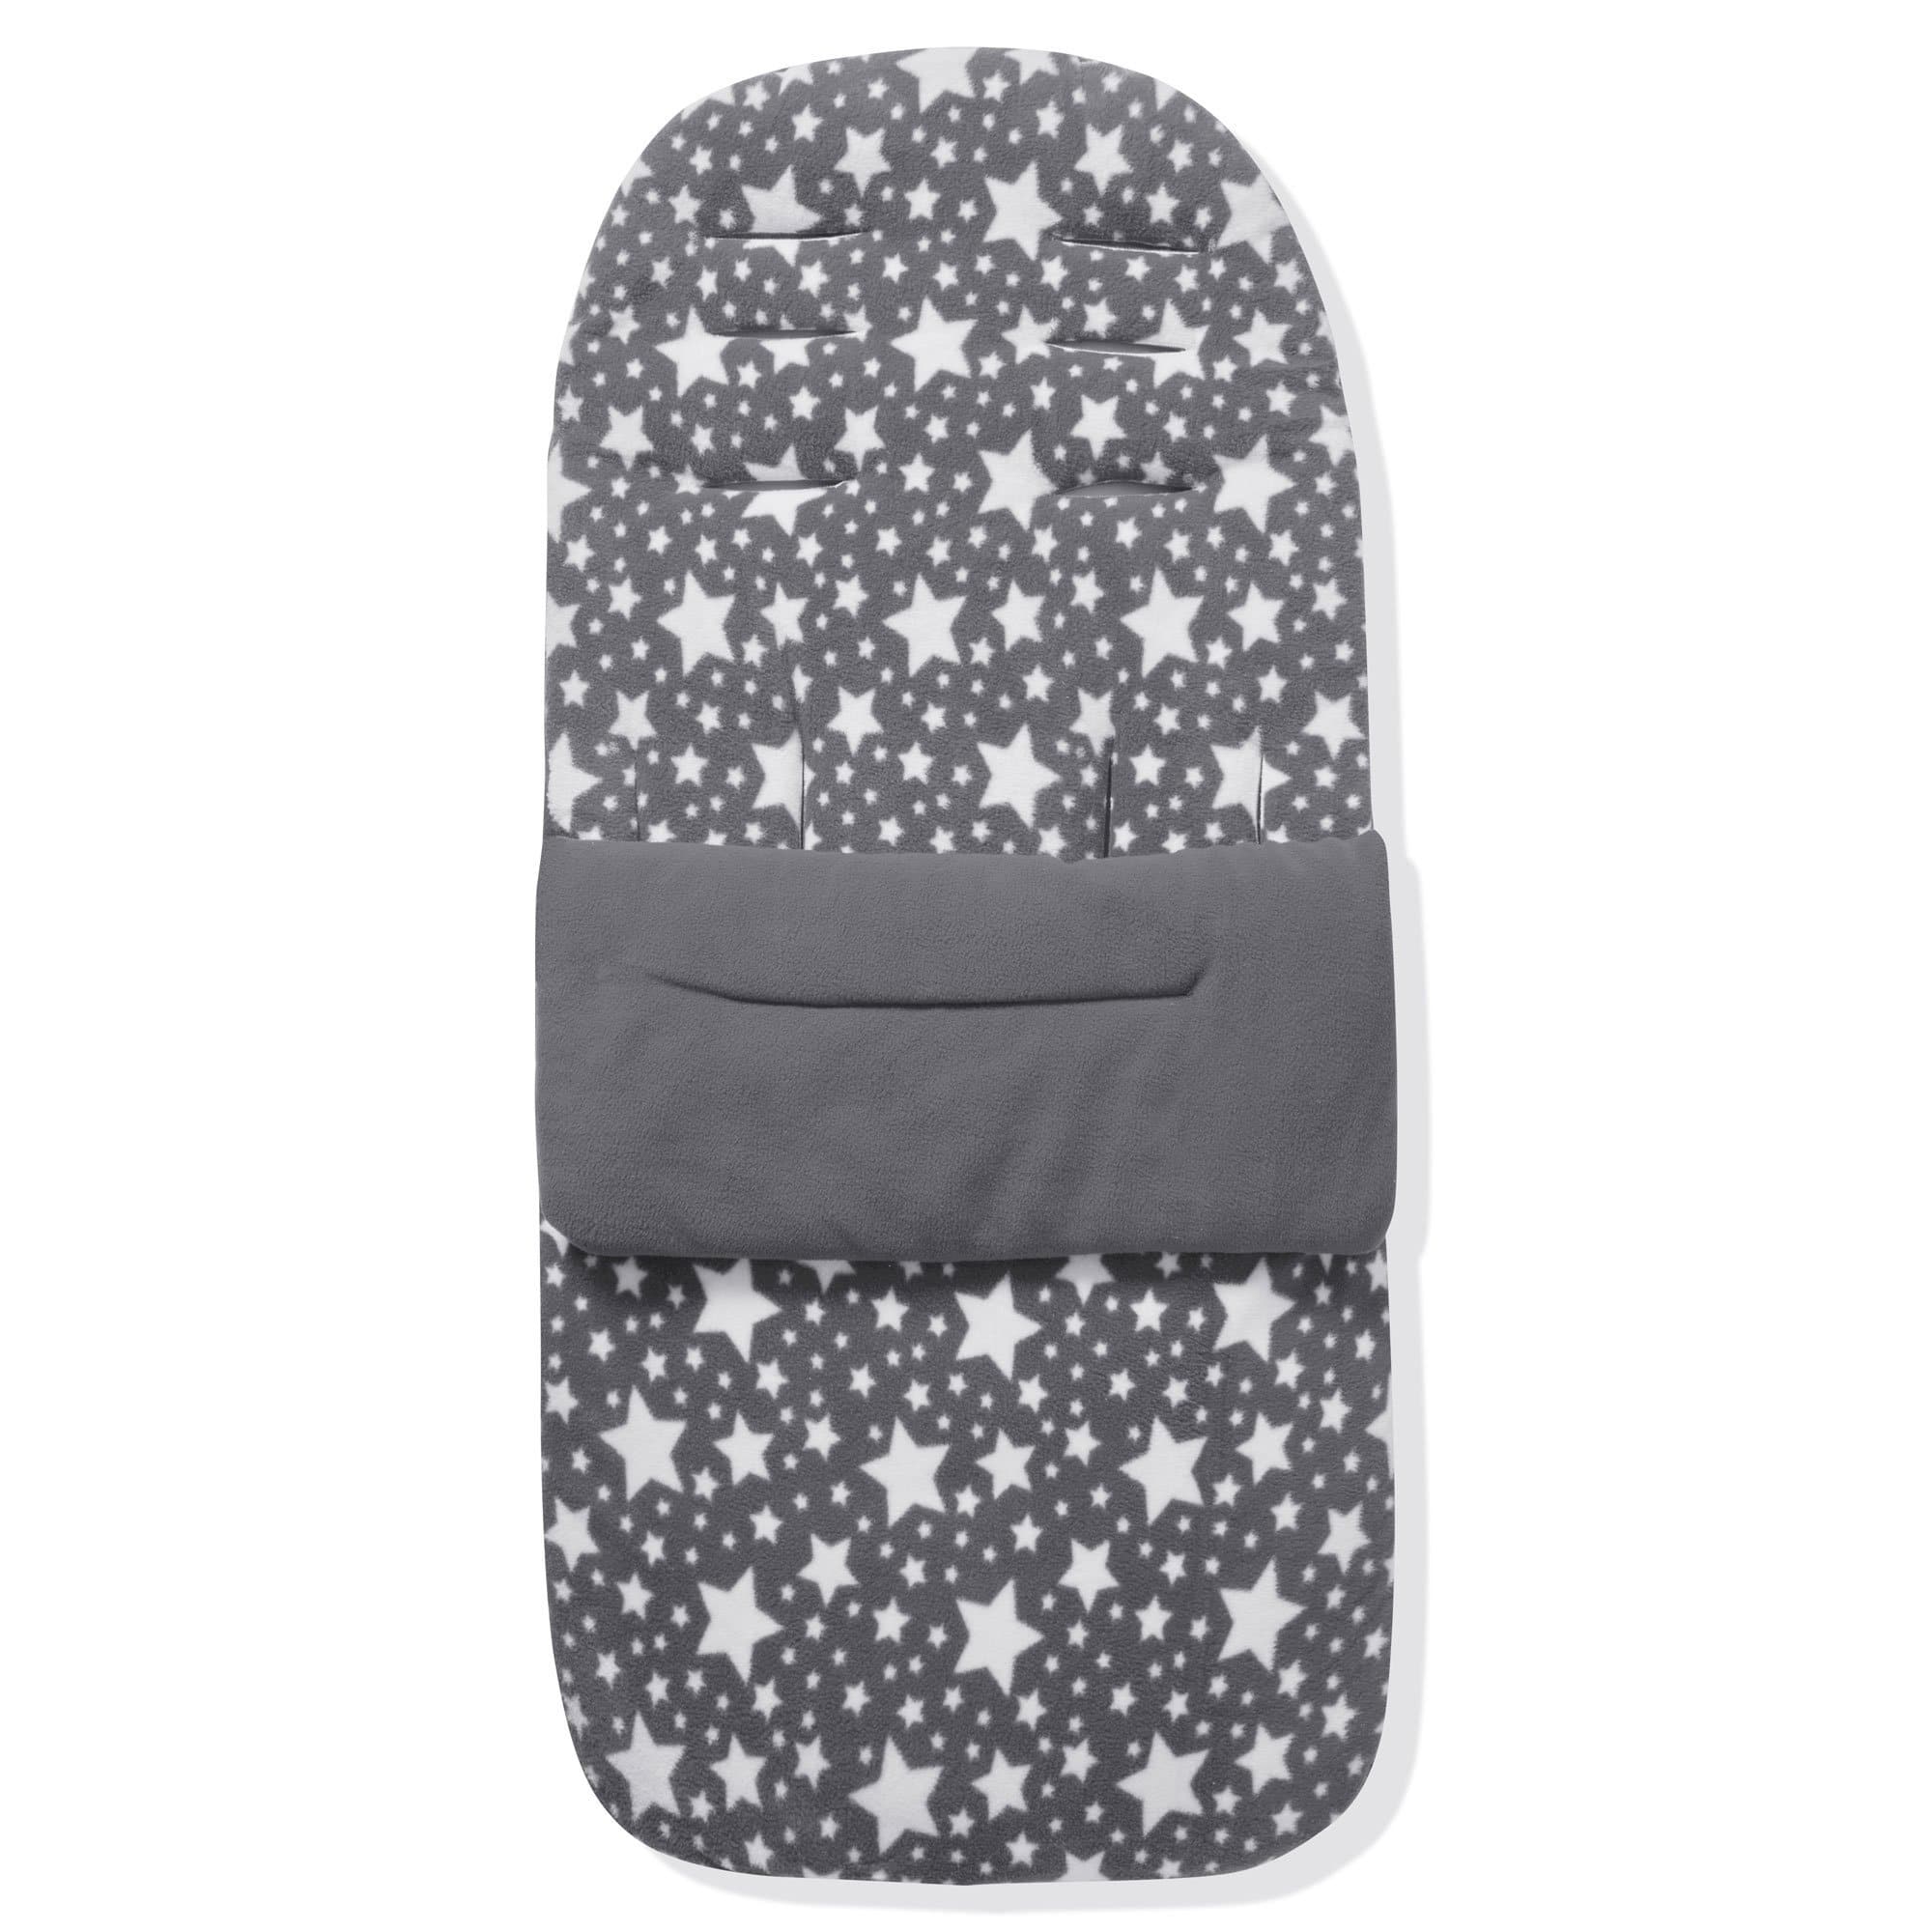 Fleece Footmuff / Cosy Toes Compatible with iCandy - Grey Star / Fits All Models | For Your Little One